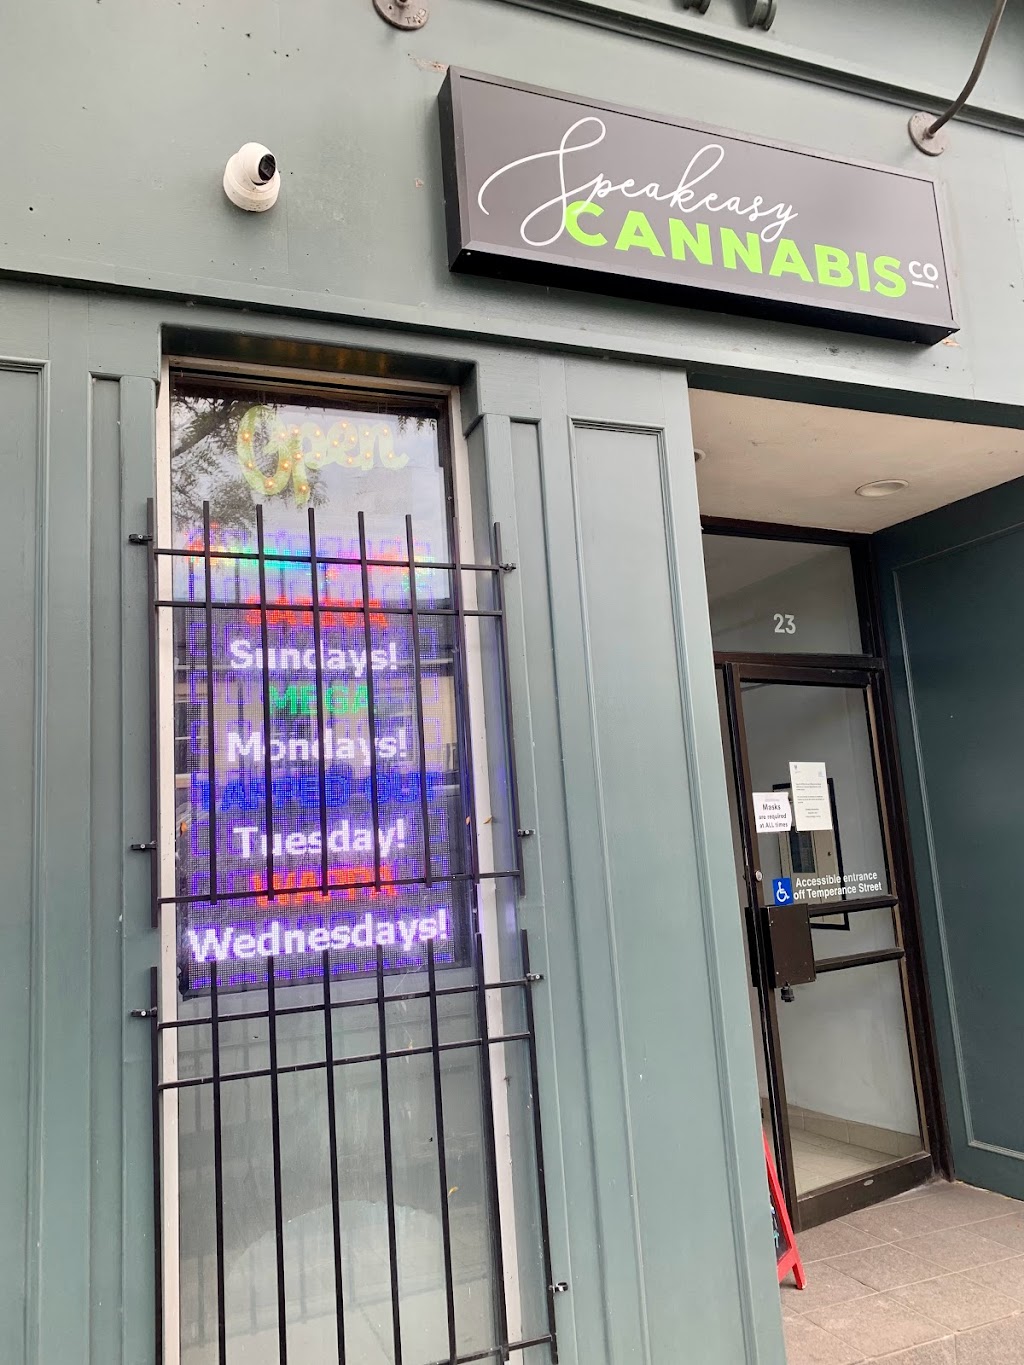 Speakeasy Cannabis Bowmanville / Clarington | store | 21 King St W, Bowmanville, ON L1C 1R2, Canada | 9056233966 OR +1 905-623-3966